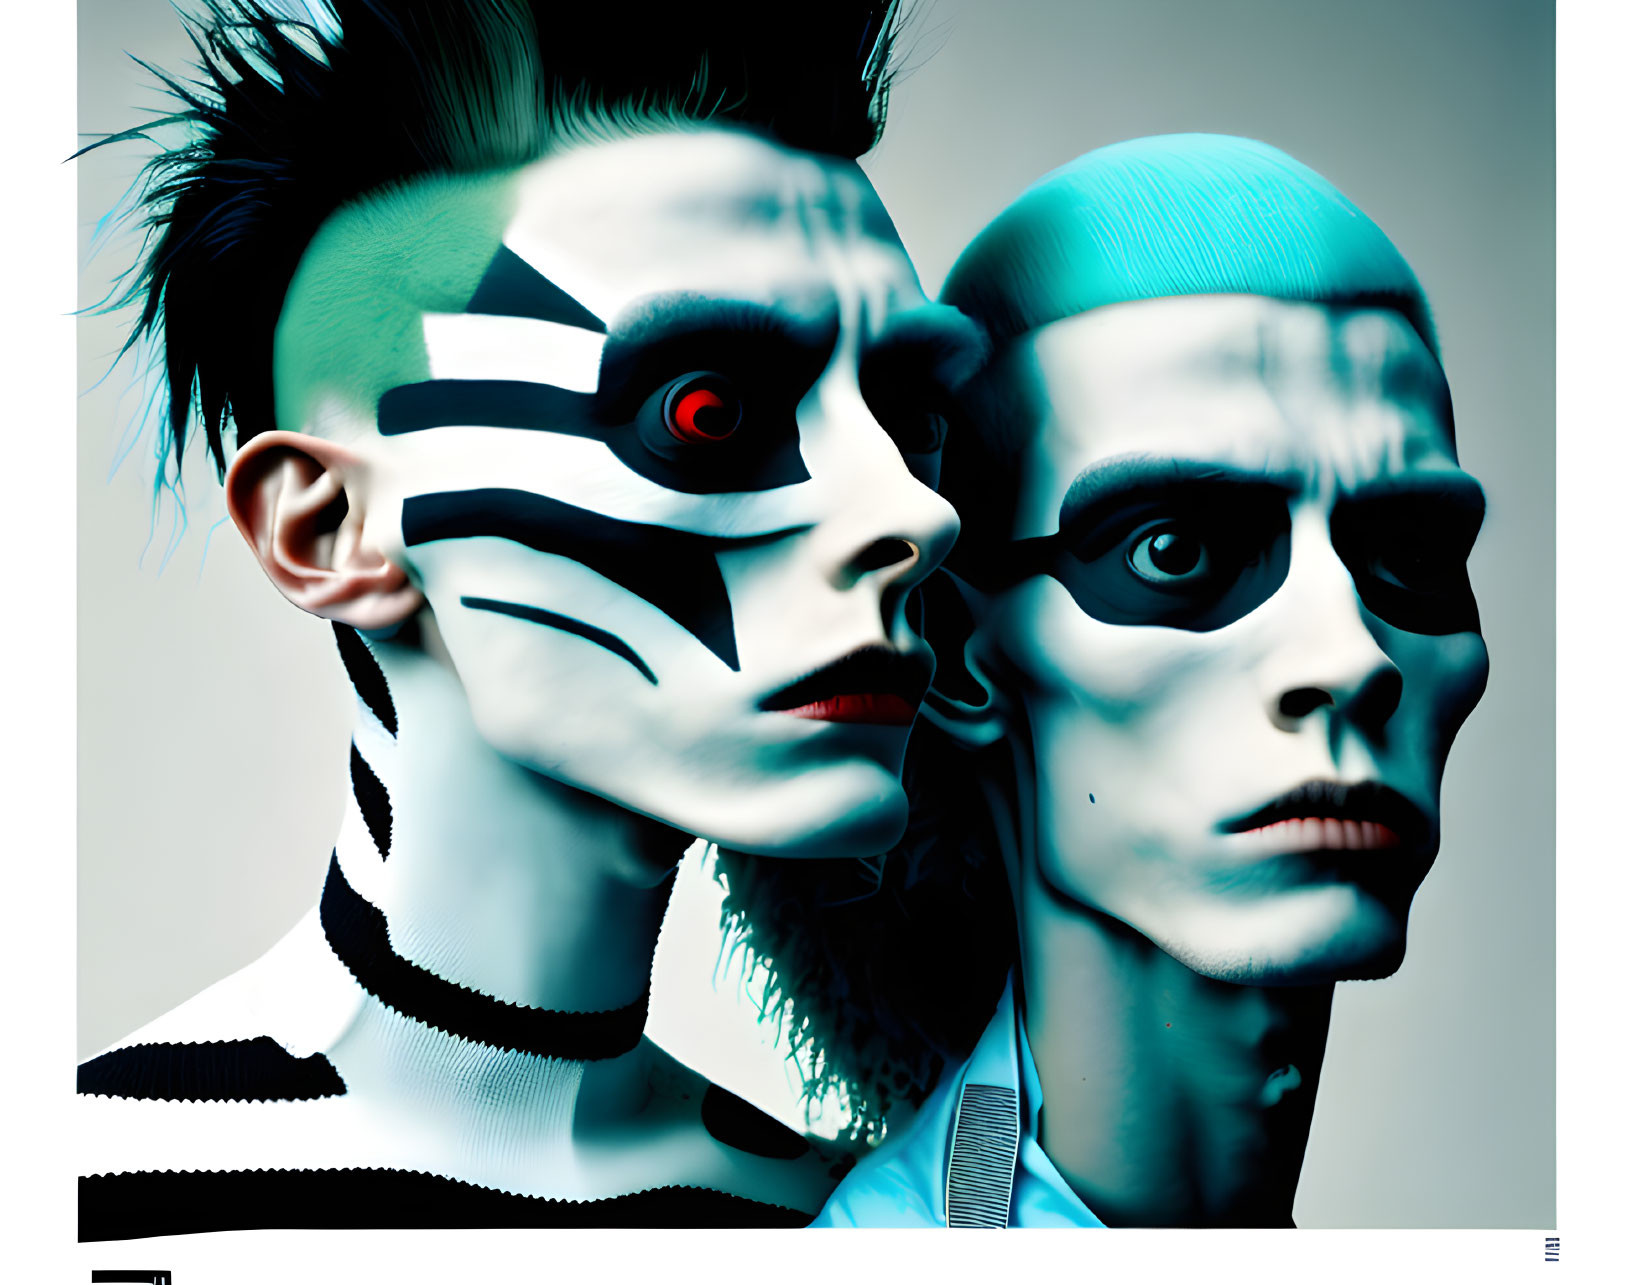 Avant-garde makeup with futuristic and tribal designs in black, white, and red.